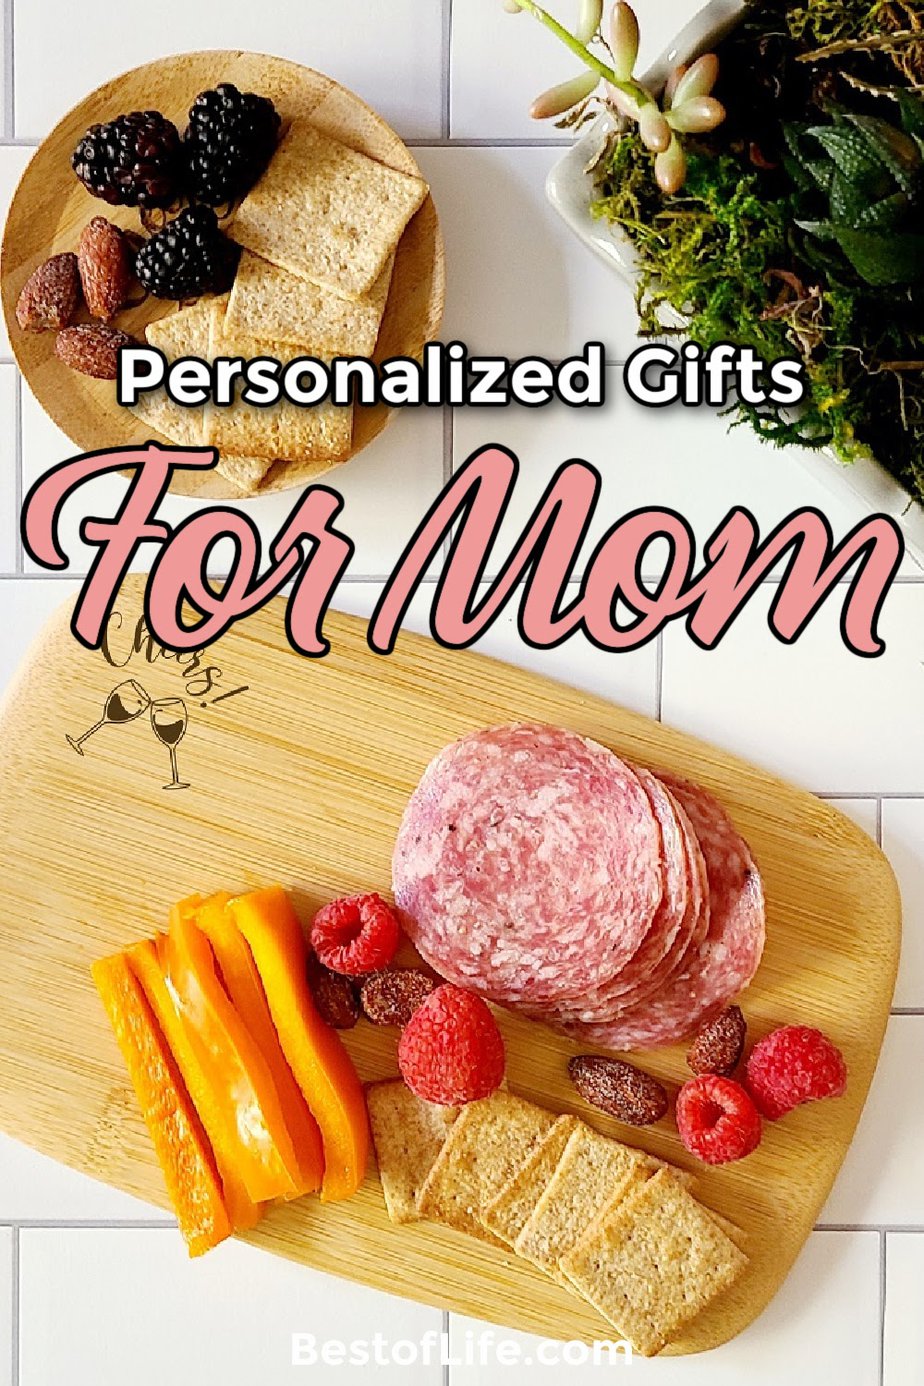 The best personalized gifts for mom don’t need to cost an arm and a leg, they just need to be meaningful to your mom and show her that you love and appreciate her. Gift Ideas for Mom | Engraved Gifts for Mom | Personalized Gifts for Mother’s Day | Personalized Gifts for Christmas | Things She Will Love | Gifts for Wine Lovers | Gifts for Party Hosts #giftideas #giftsformom via @thebestoflife